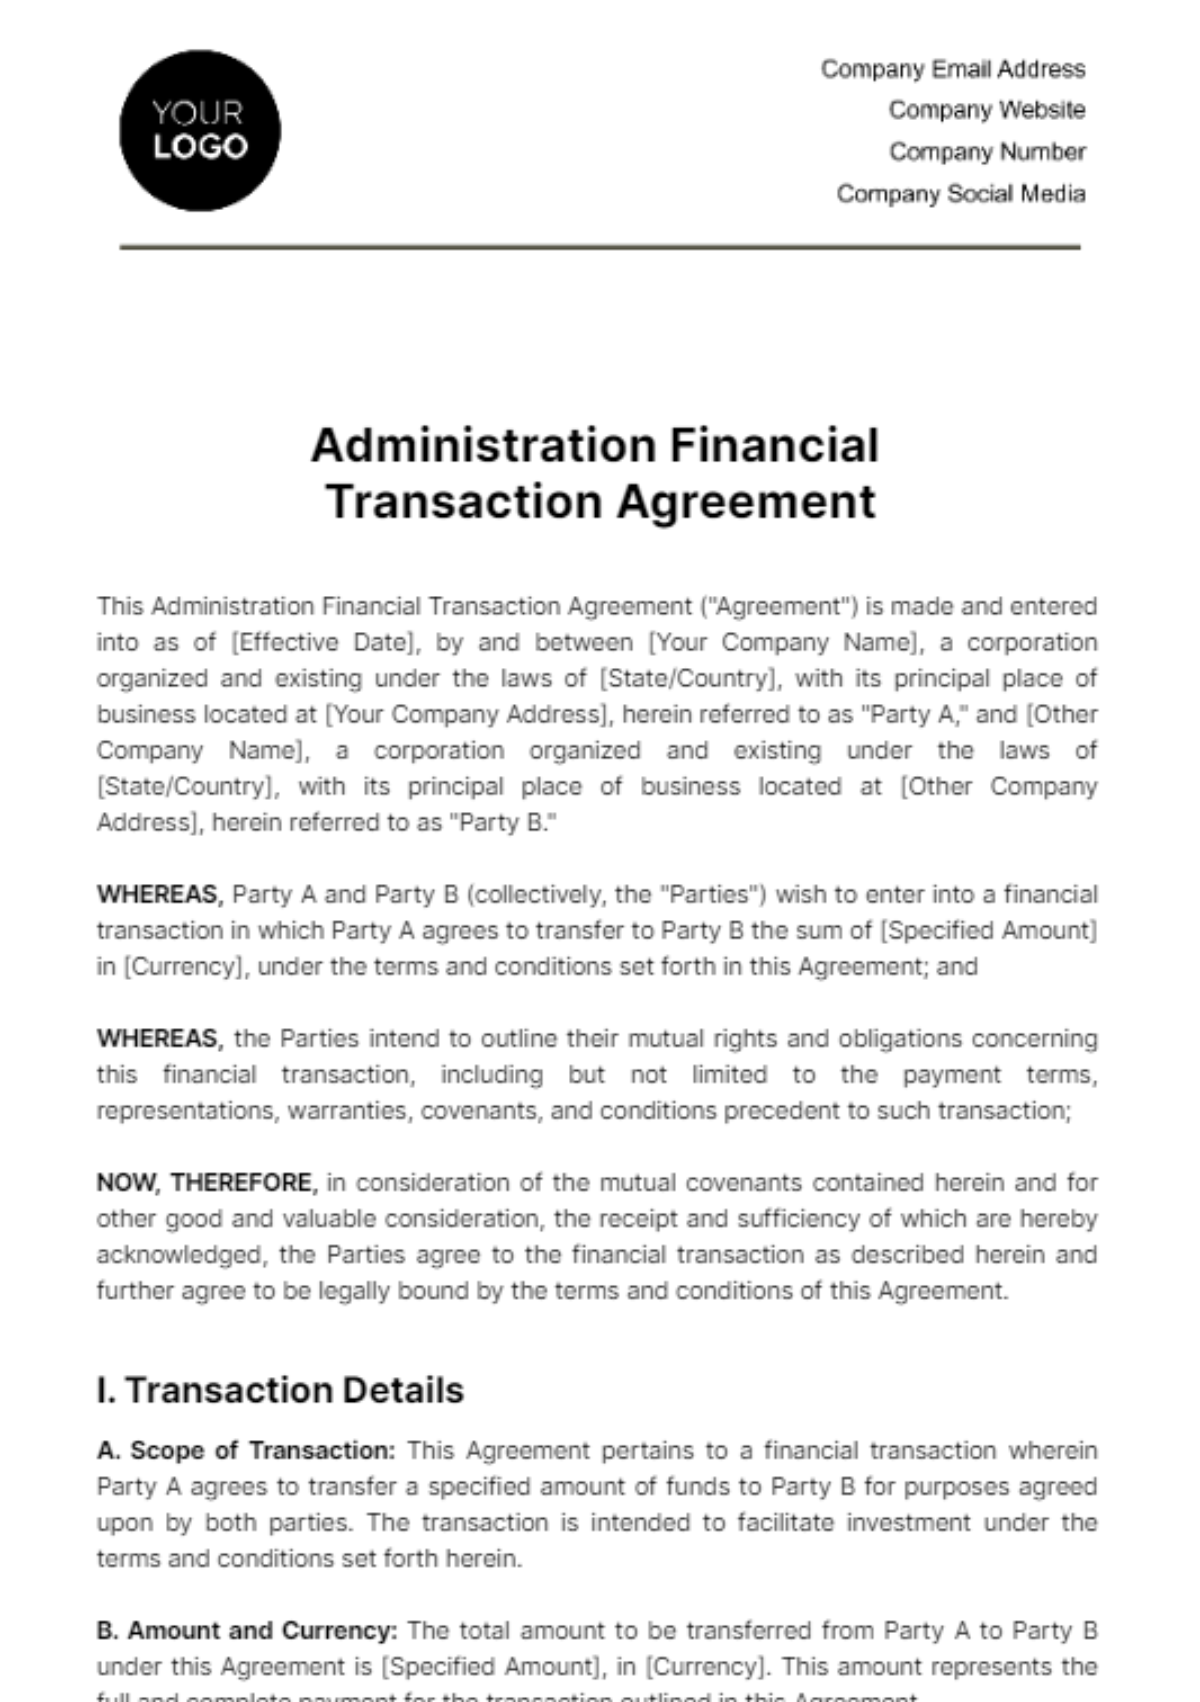 Free Administration Financial Transaction Agreement Template